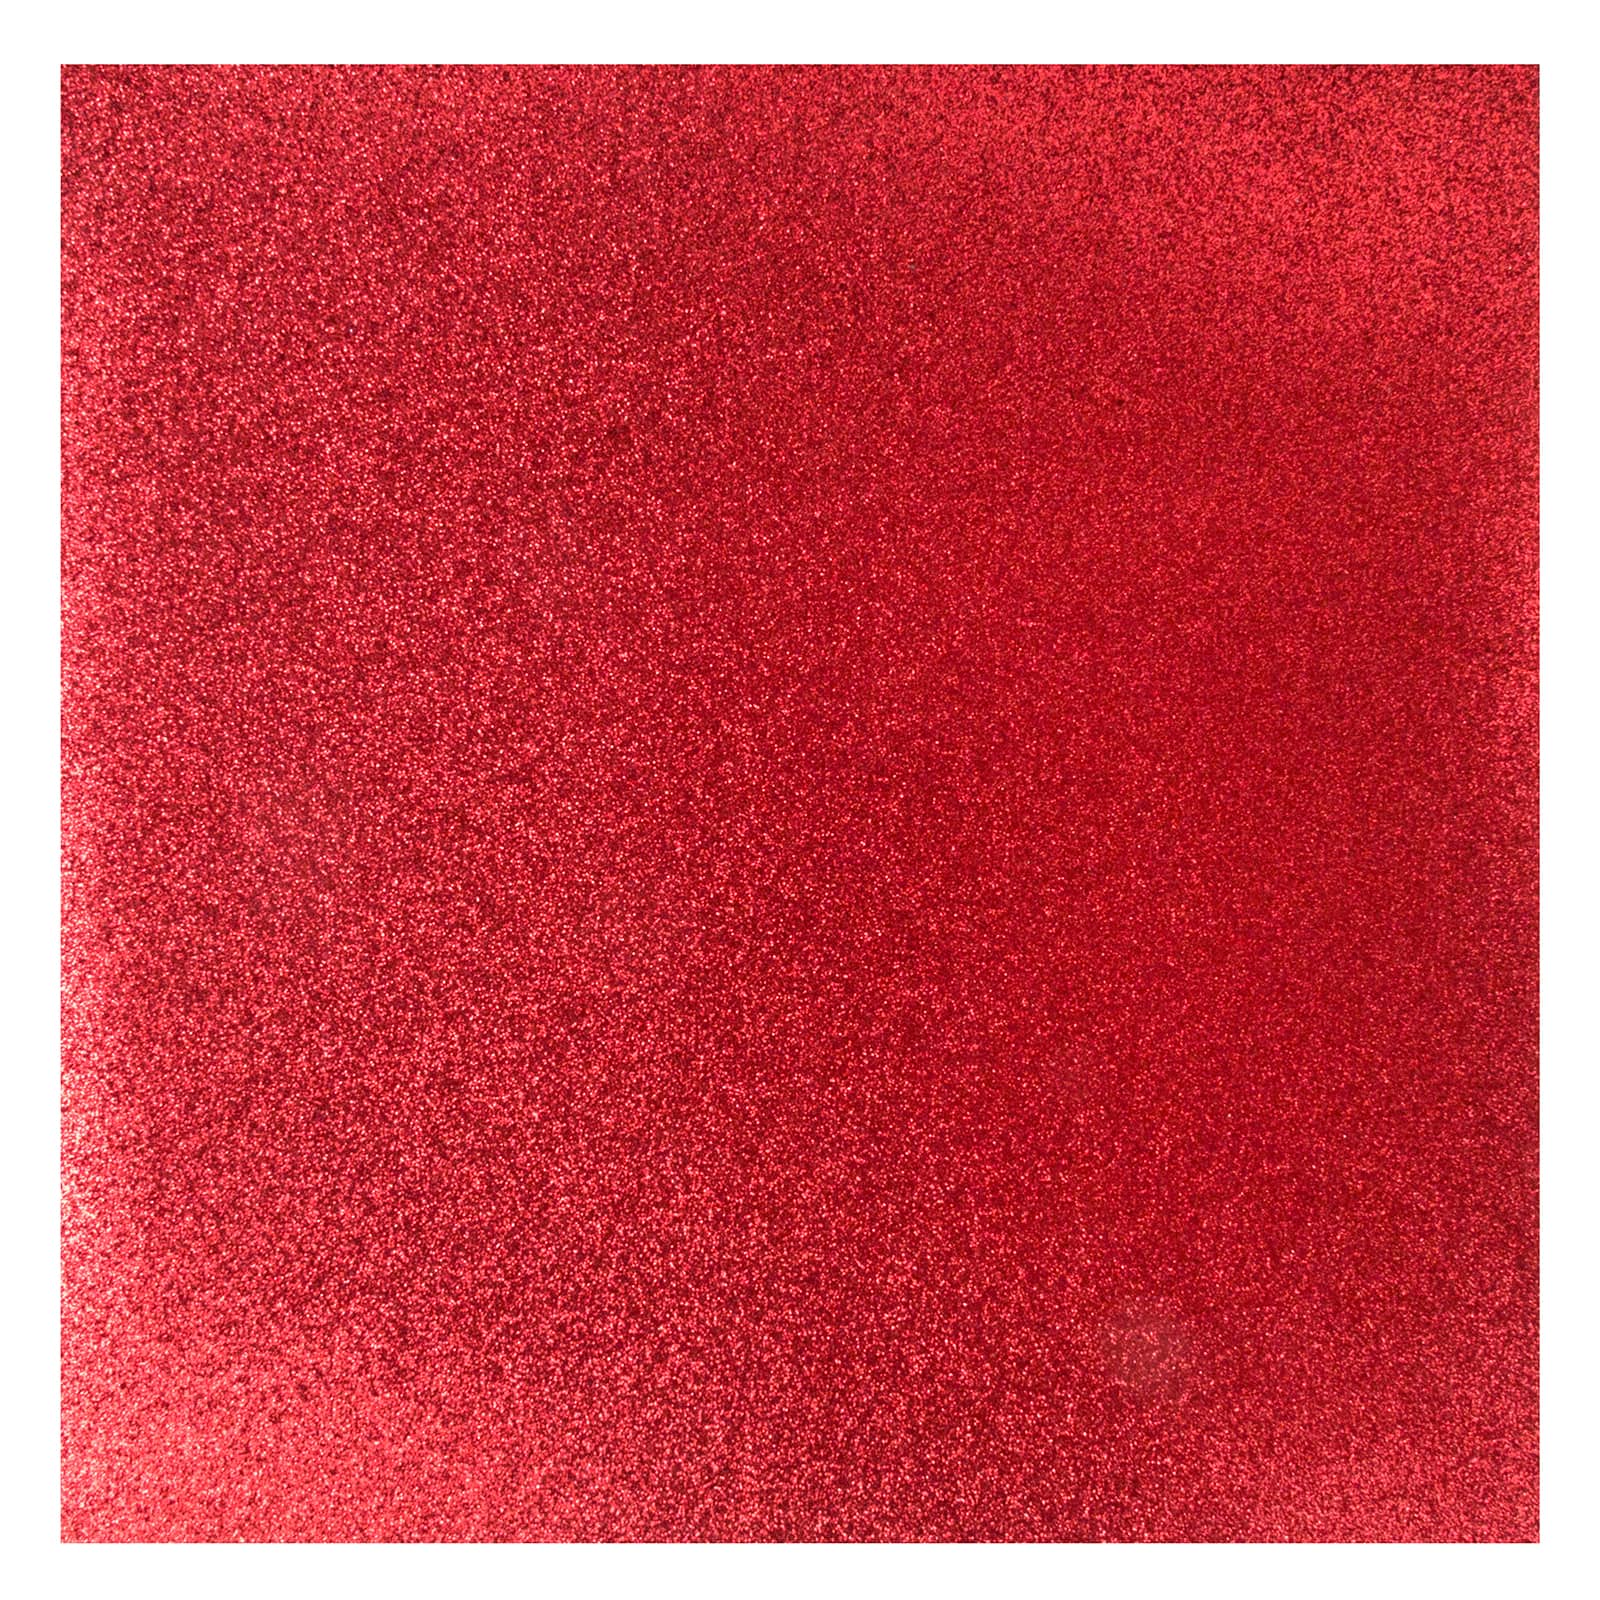 Buy Red Glitter Cardstock Online. COD. Low Prices. Free Shipping. Premium  Quality.